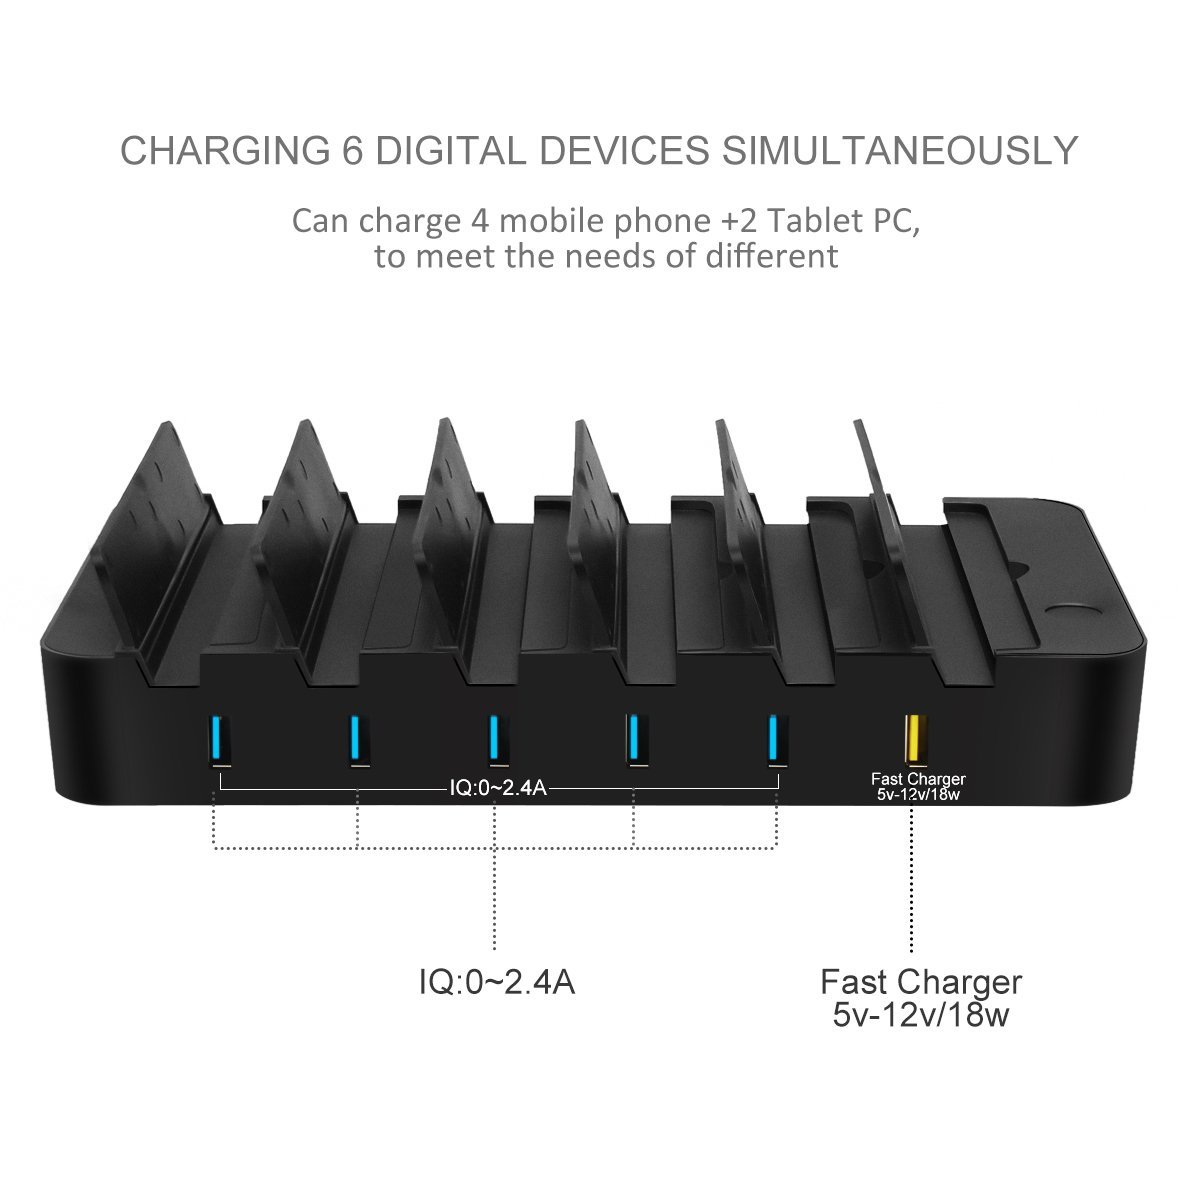 6-Port 60W USB Charger with QC 3.0 Smart IC Tech Fast Charger for iPhone 8/7/6s/Plus Samsung Xiaomi